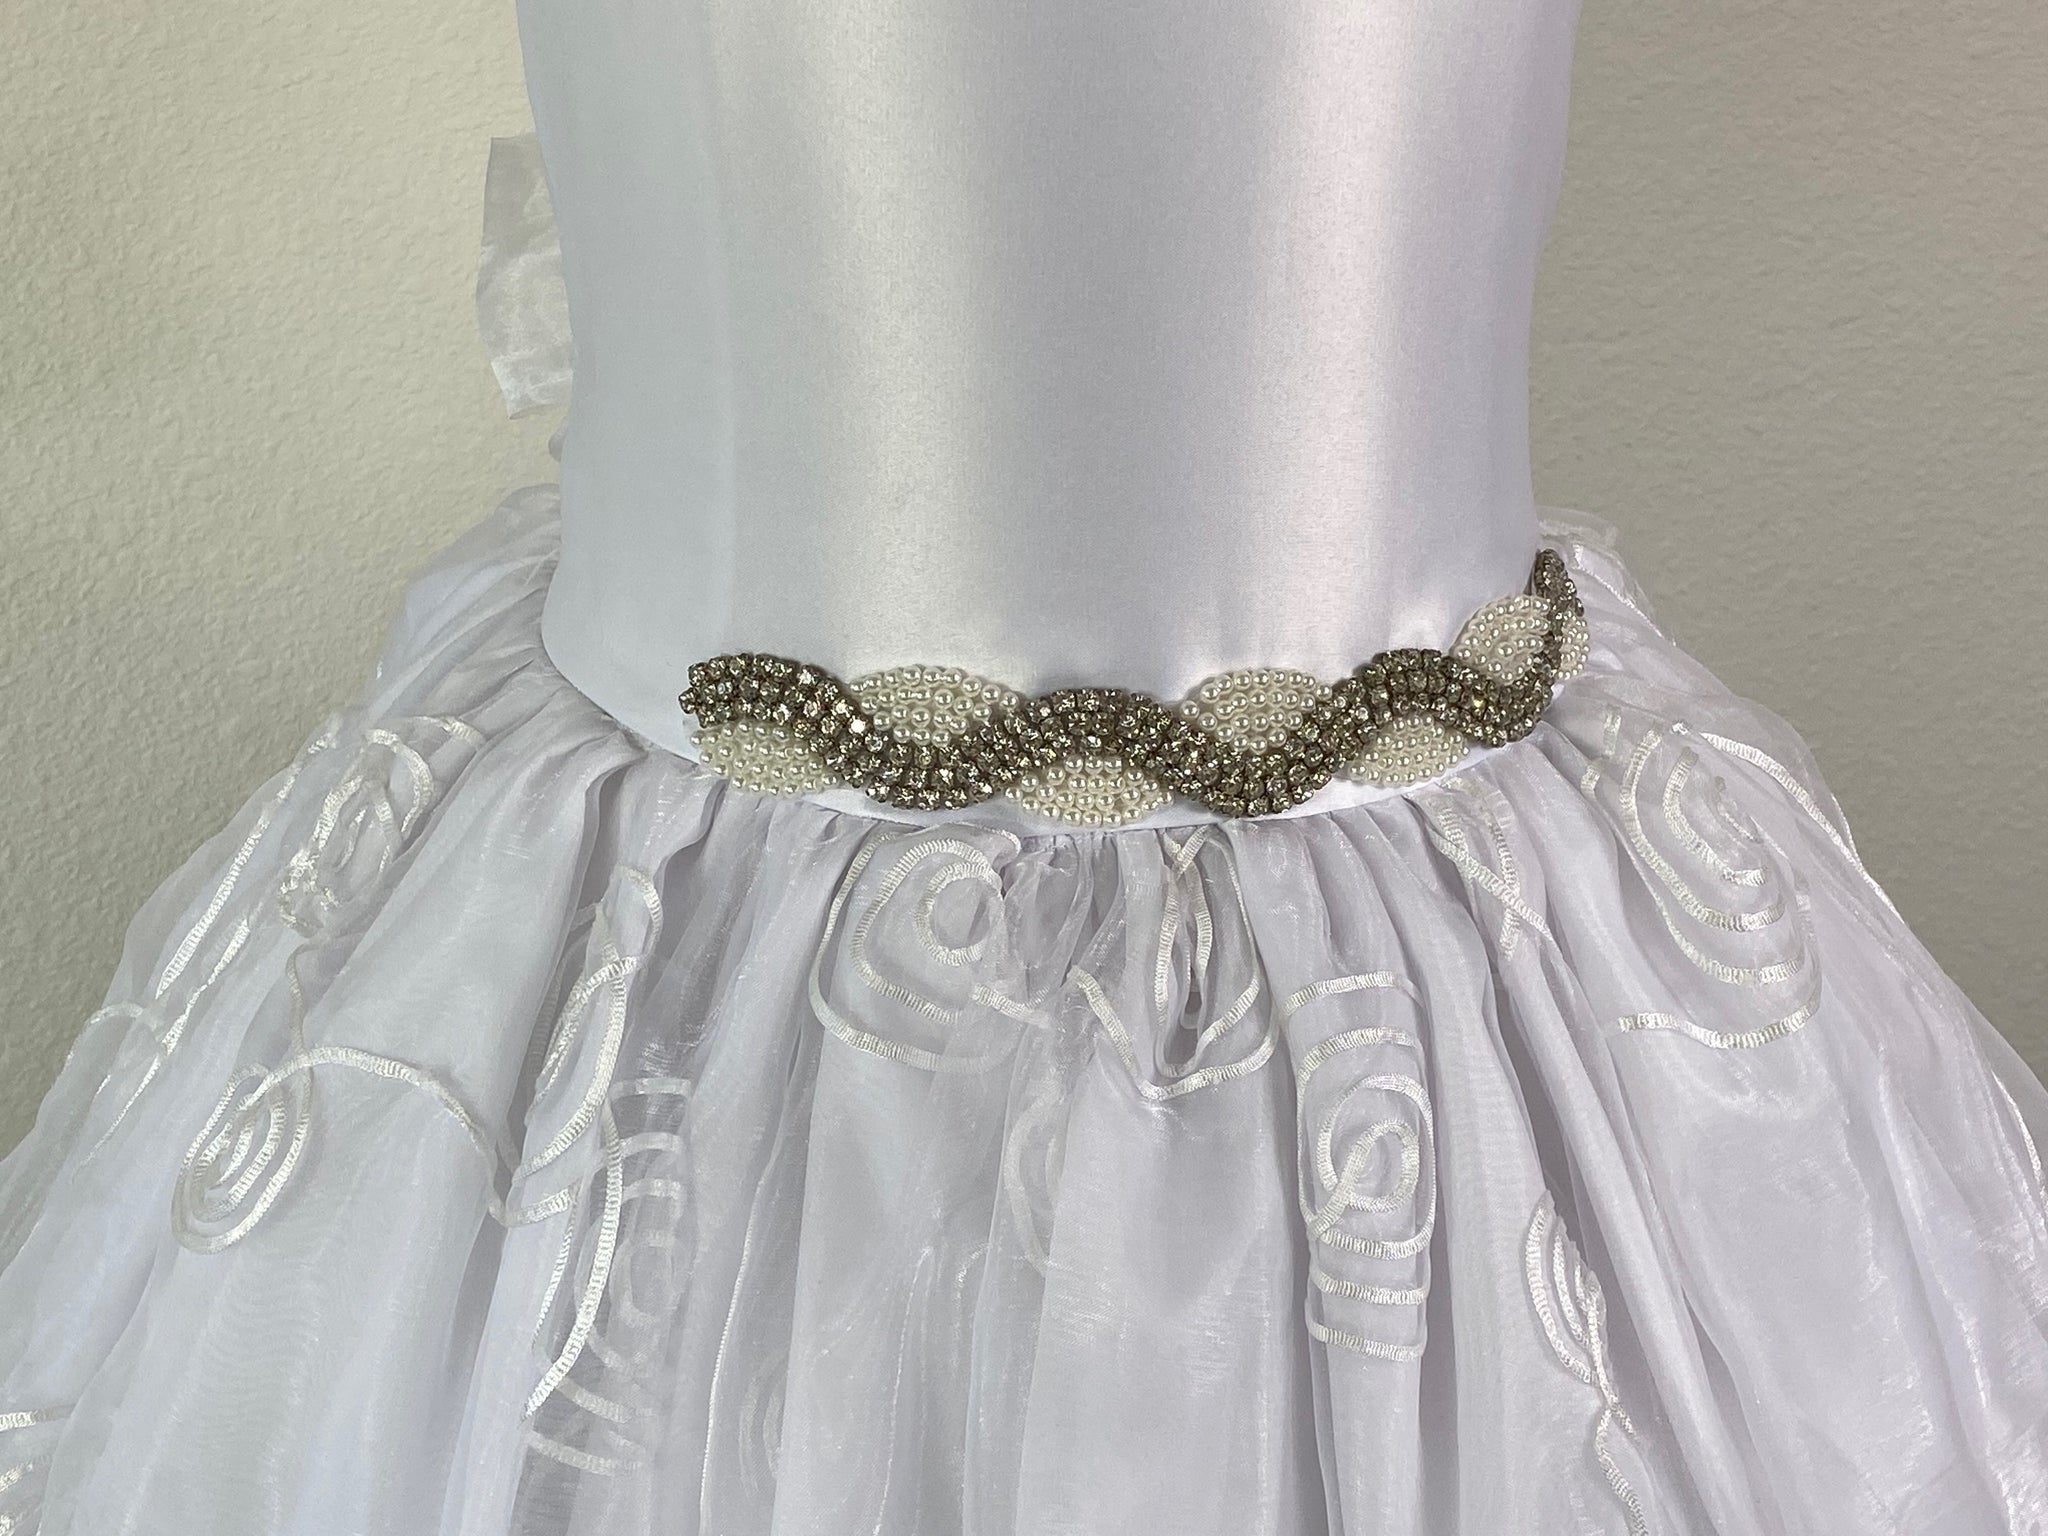 White, size 8 Satin bodice Scoop Neckline Pearl and Diamond Twisted Belt Detailing Four Layered Tulle over Satin Dress with swirl design Button closure in back Mesh ribbon for bow